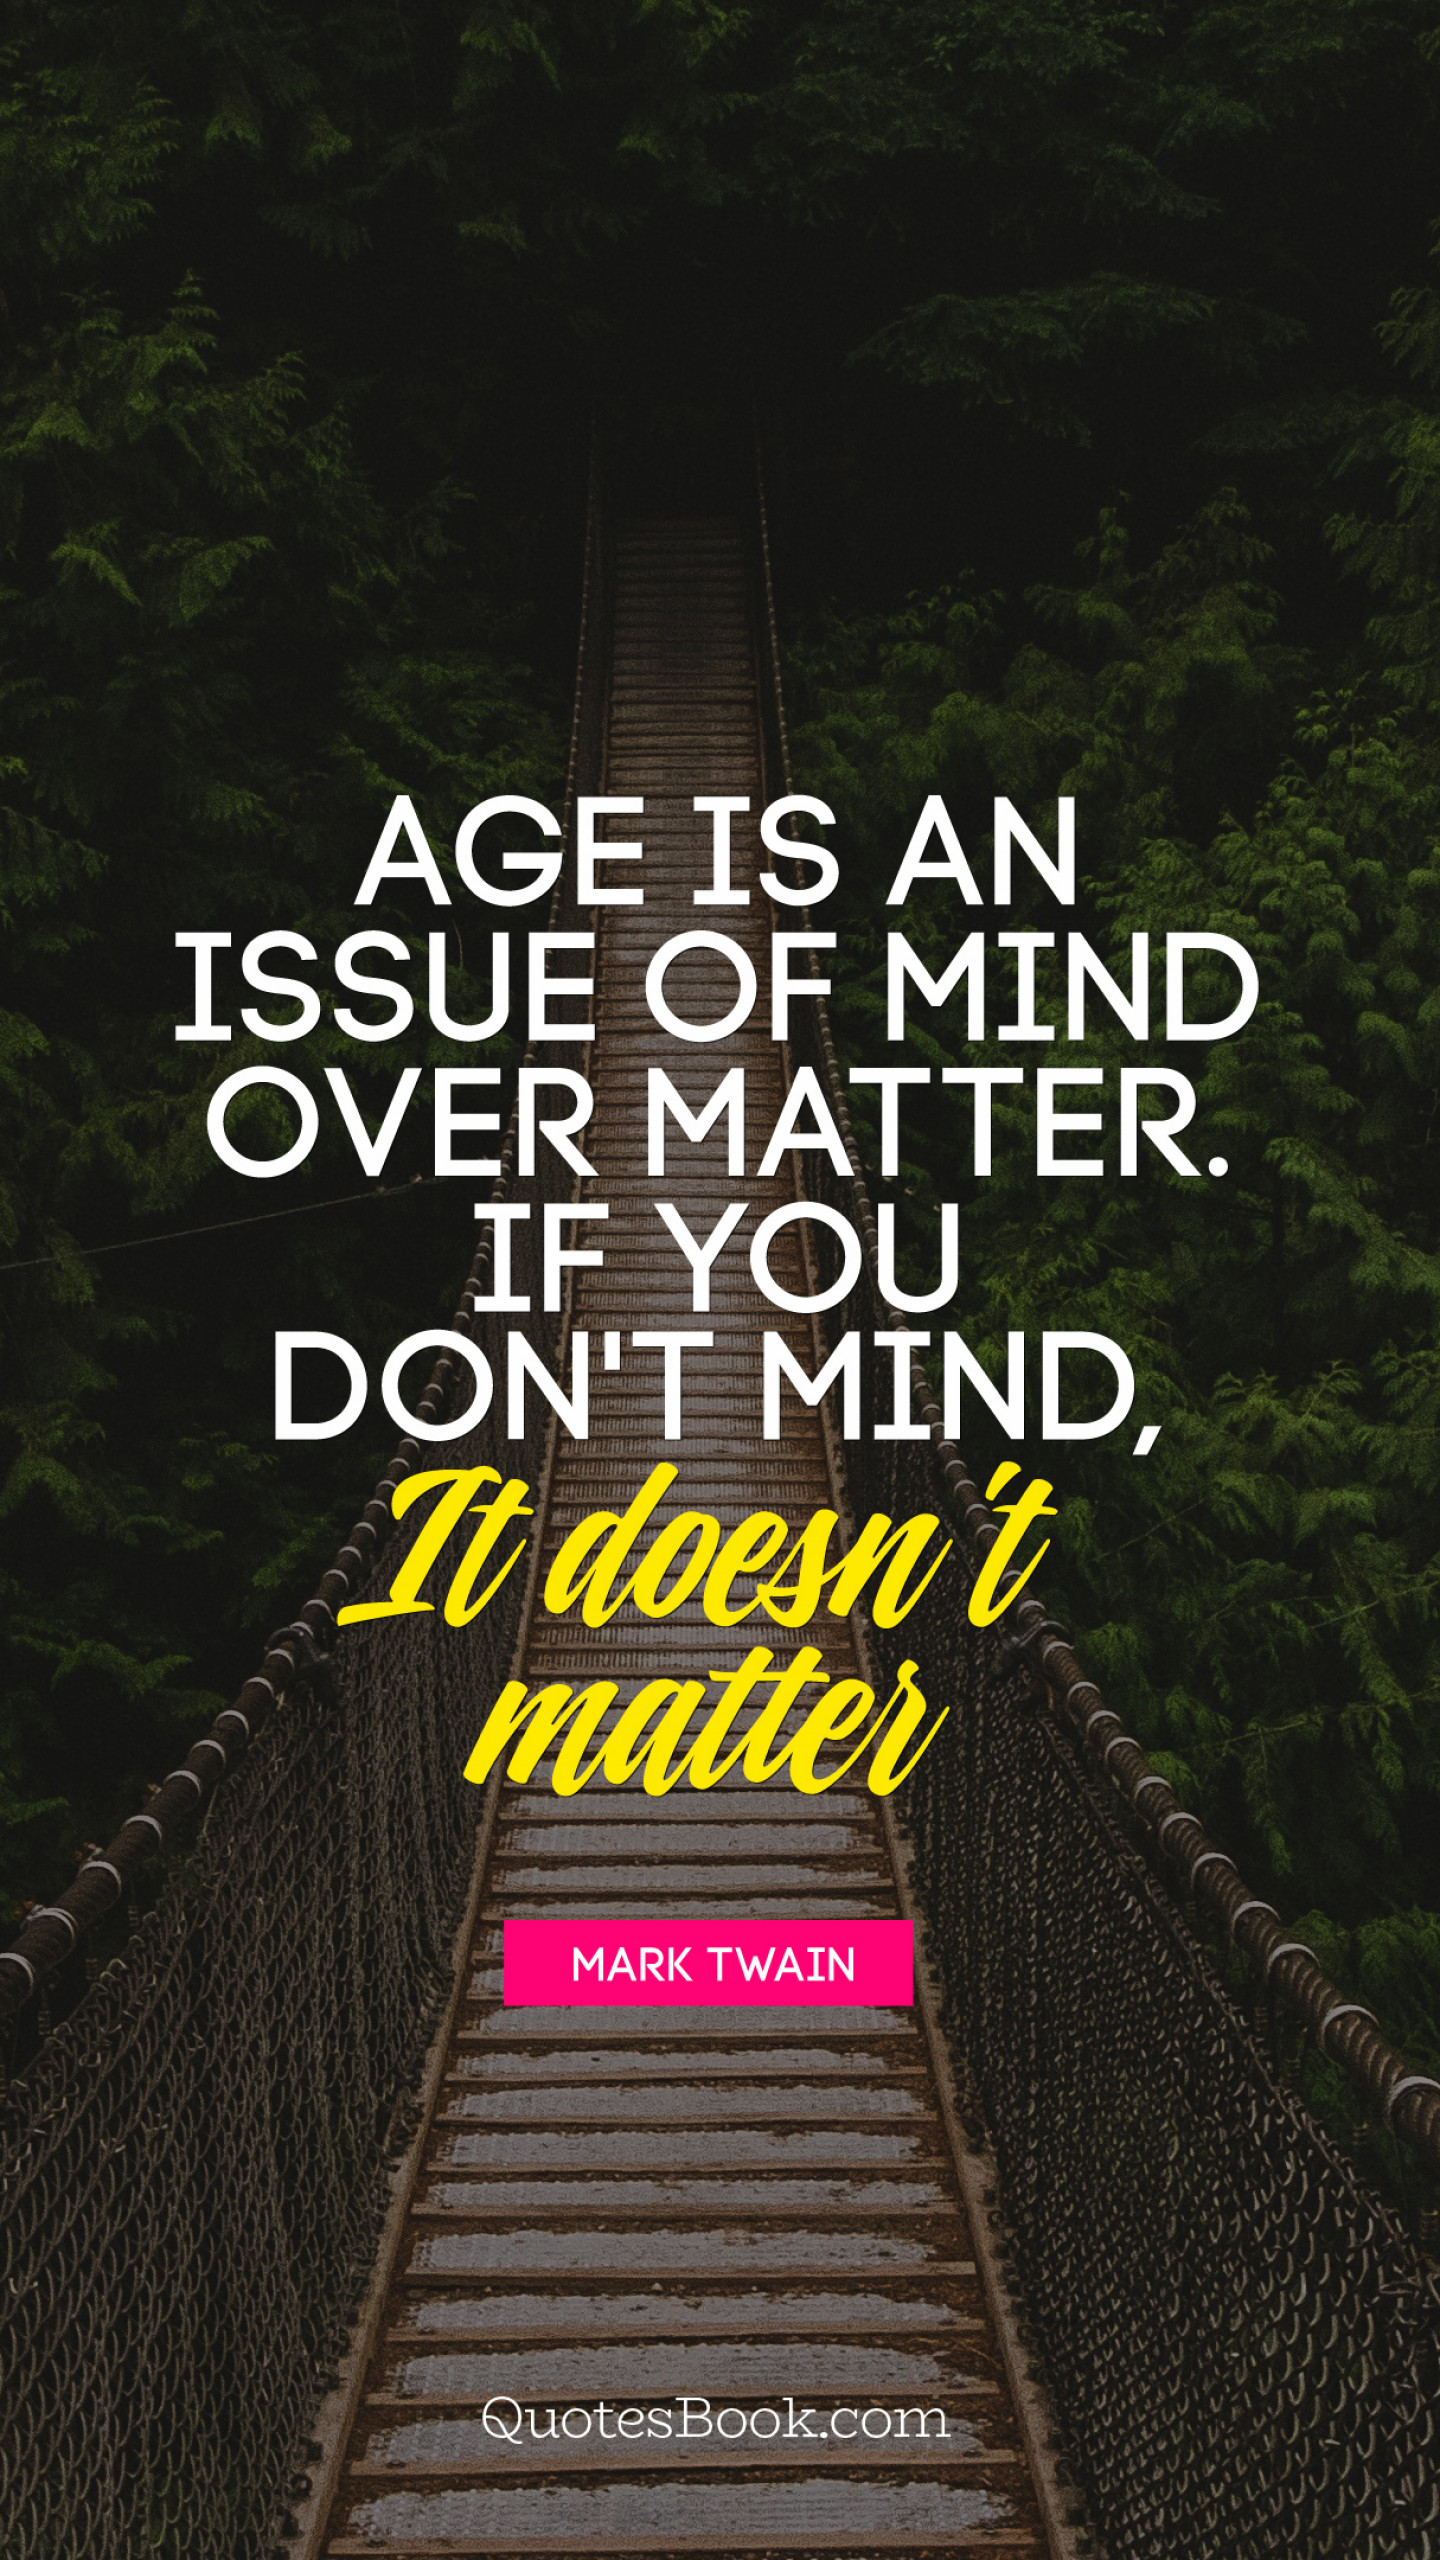 Age is an issue of mind over matter. If you don't mind, it doesn't matter.  - Quote by Mark Twain - Page 3 - QuotesBook